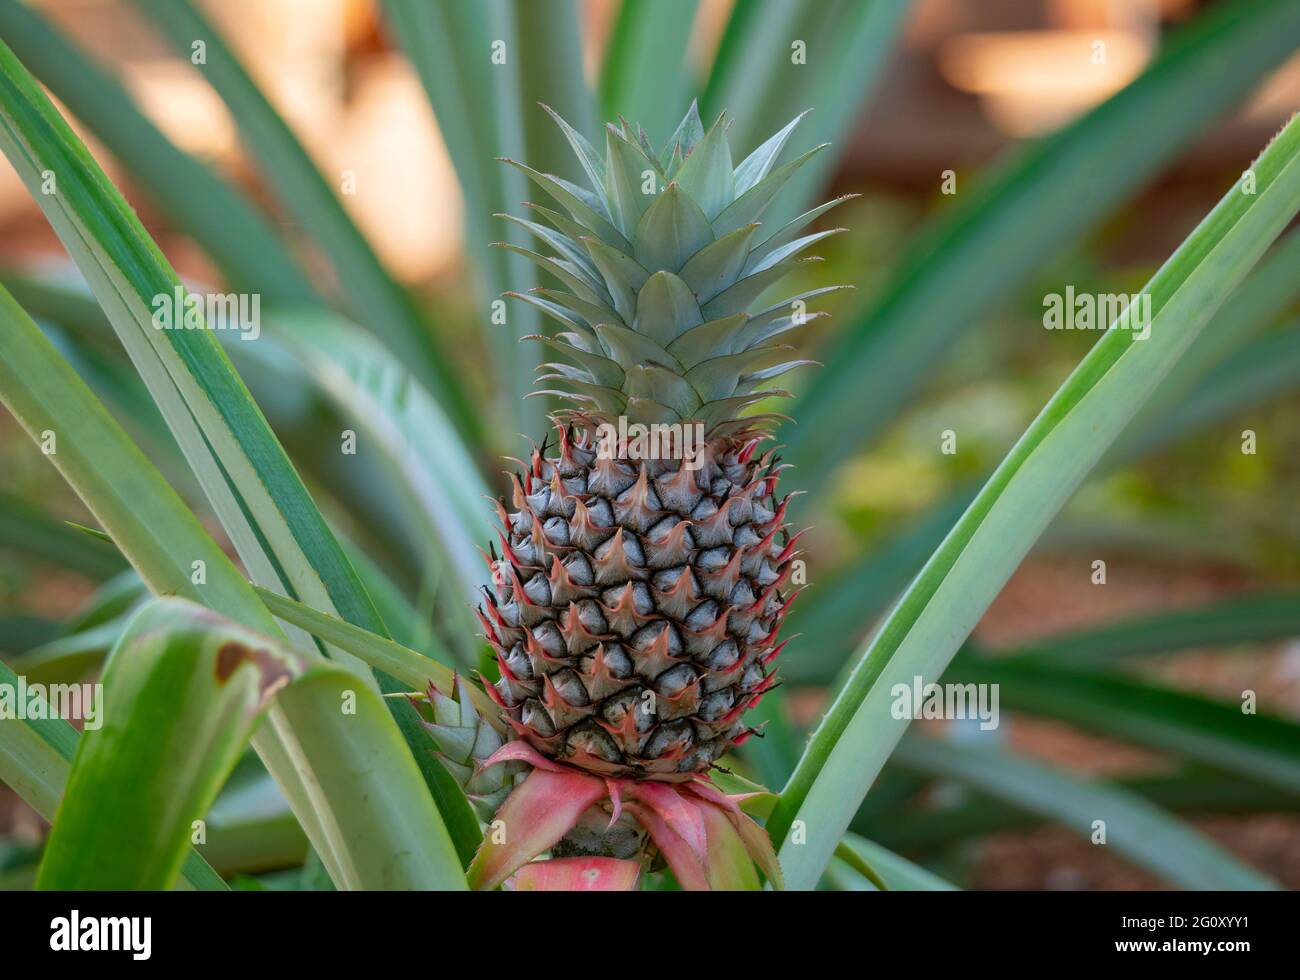 A pineapple, Ananas comosus, plant with fruit. Stock Photo